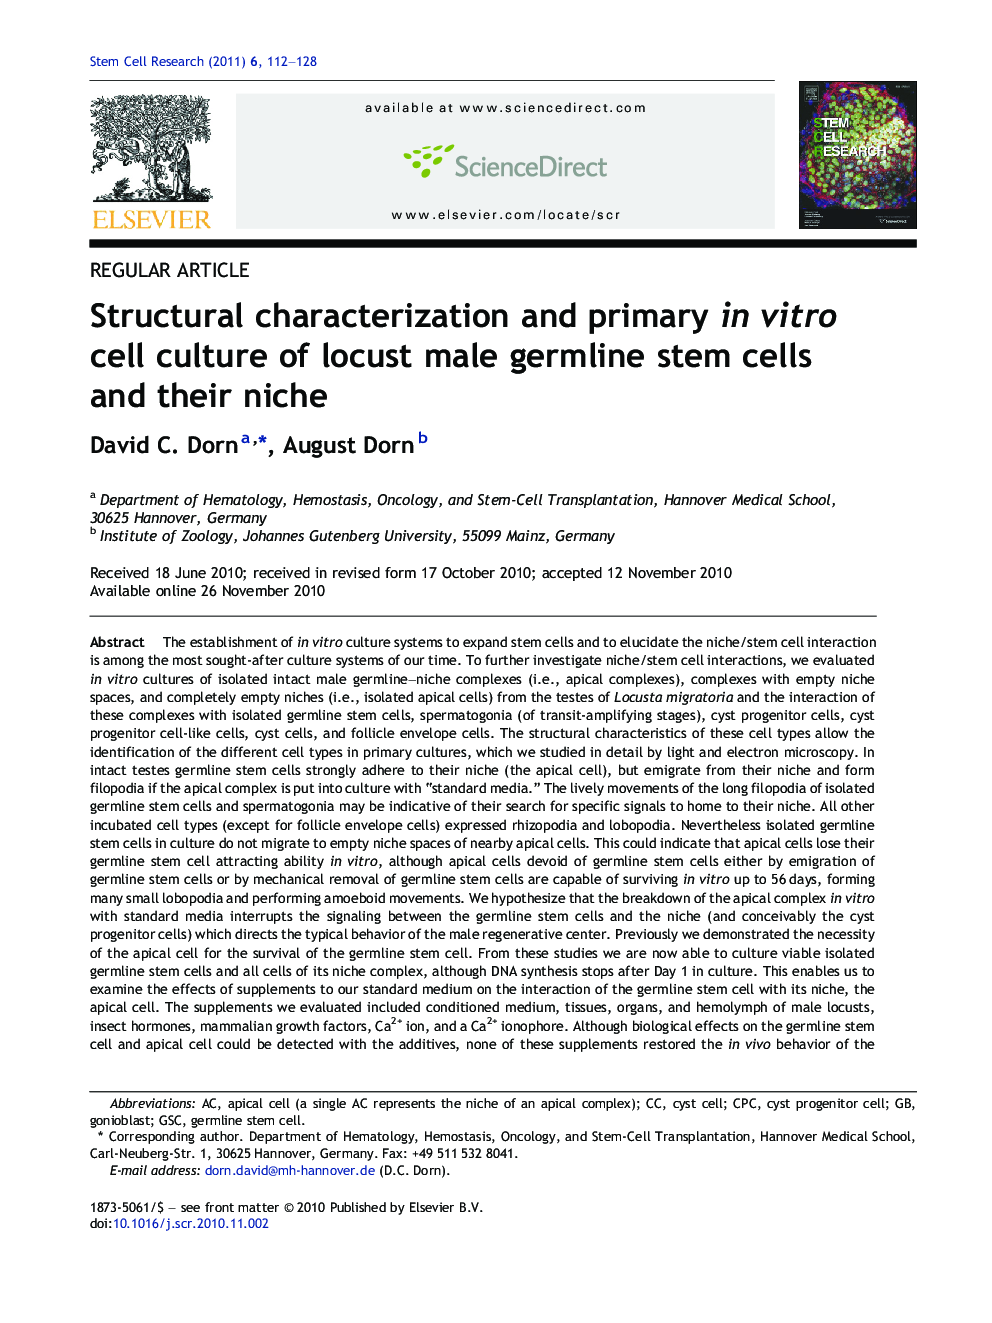 Structural characterization and primary in vitro cell culture of locust male germline stem cells and their niche